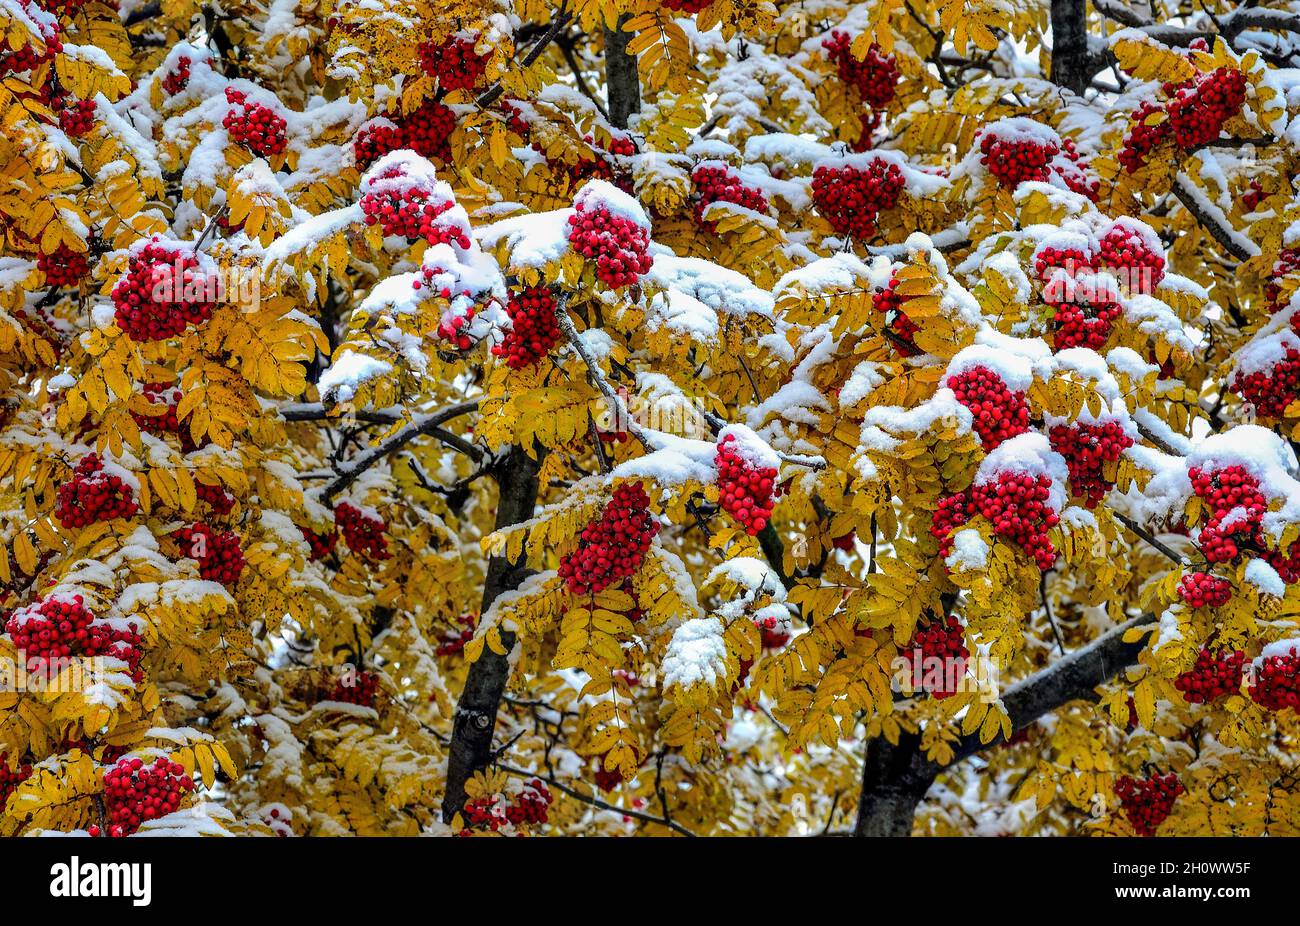 First snow on colorful fall foliage and red berries of rowan tree branches after snowfall. Seasonal background - wonderful scene of seasons changing. Stock Photo